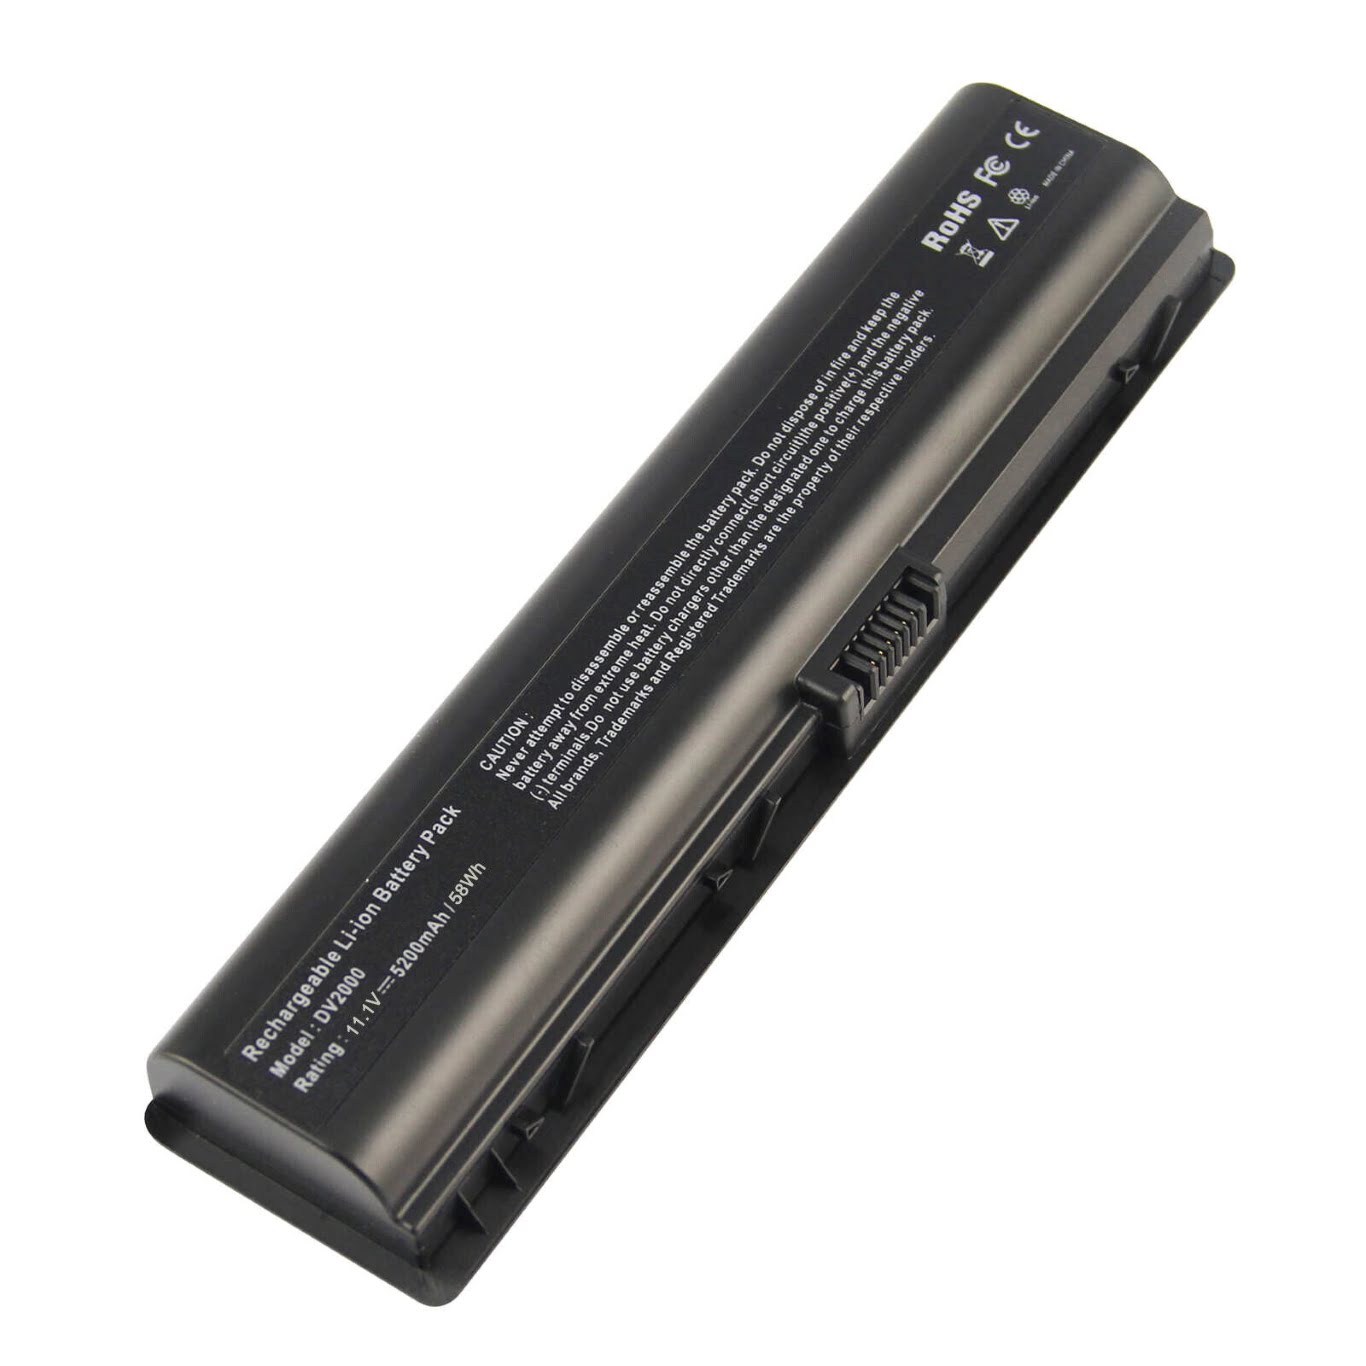 411462-121, 411462-141 replacement Laptop Battery for HP 6000XX, CTO